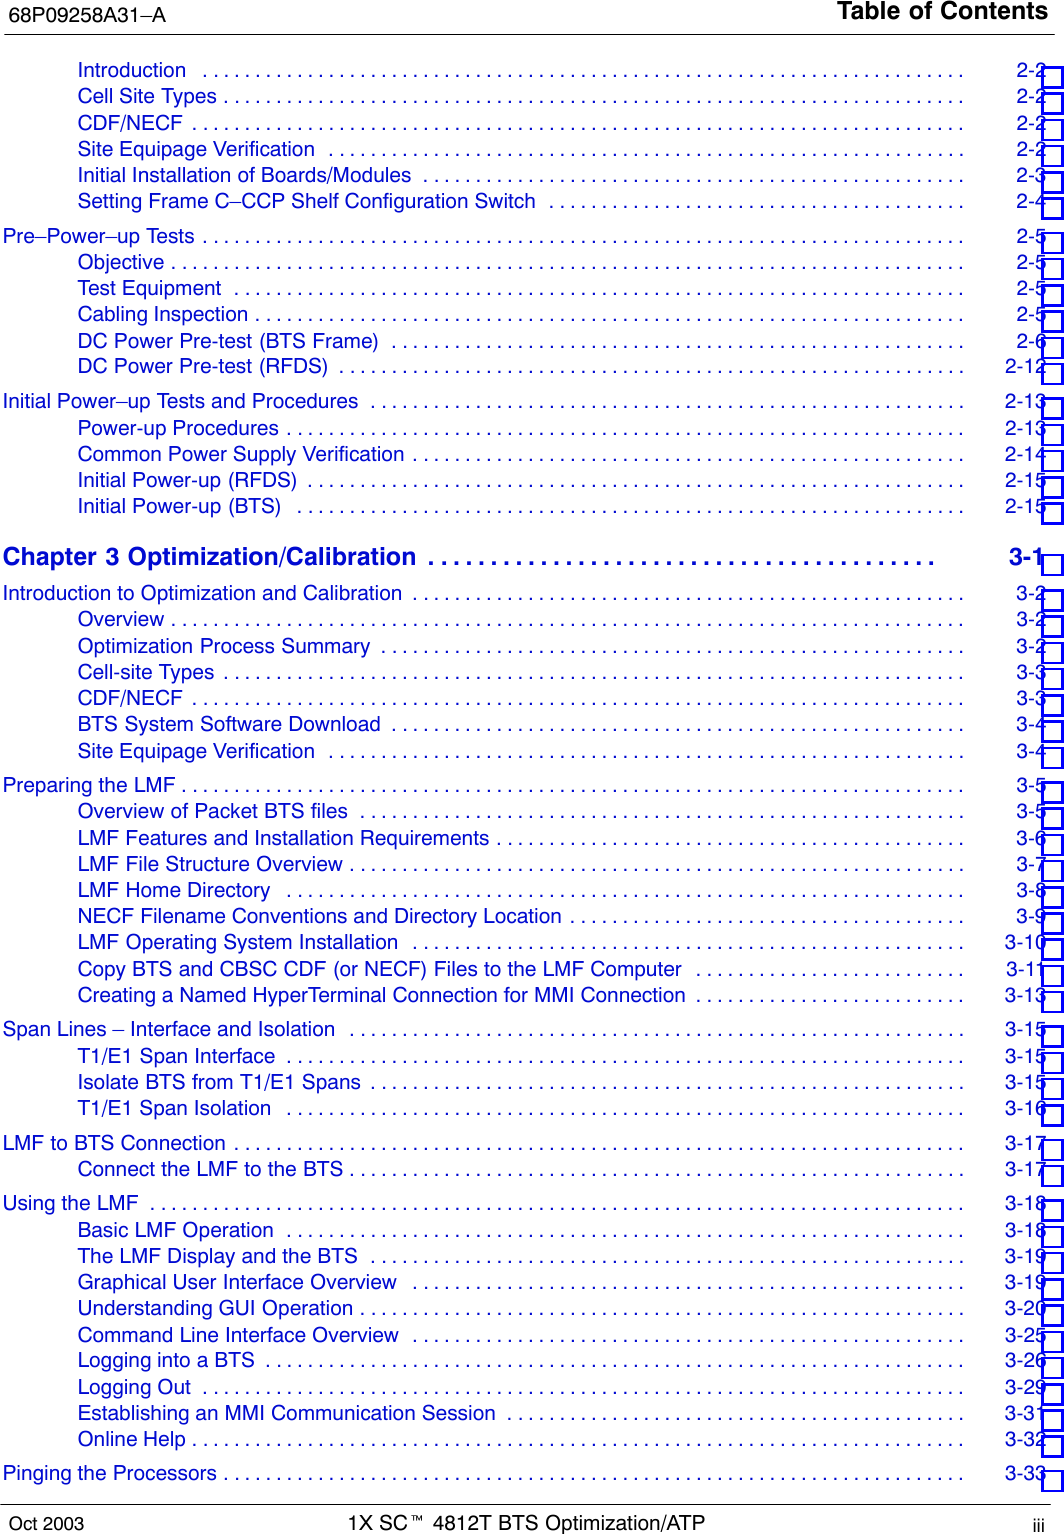 Table of Contents68P09258A31–A1X SCt 4812T BTS Optimization/ATP iiiOct 2003Introduction 2-2 . . . . . . . . . . . . . . . . . . . . . . . . . . . . . . . . . . . . . . . . . . . . . . . . . . . . . . . . . . . . . . . . . . . . . . . . . Cell Site Types 2-2 . . . . . . . . . . . . . . . . . . . . . . . . . . . . . . . . . . . . . . . . . . . . . . . . . . . . . . . . . . . . . . . . . . . . . . . CDF/NECF 2-2 . . . . . . . . . . . . . . . . . . . . . . . . . . . . . . . . . . . . . . . . . . . . . . . . . . . . . . . . . . . . . . . . . . . . . . . . . . Site Equipage Verification 2-2 . . . . . . . . . . . . . . . . . . . . . . . . . . . . . . . . . . . . . . . . . . . . . . . . . . . . . . . . . . . . . Initial Installation of Boards/Modules 2-3 . . . . . . . . . . . . . . . . . . . . . . . . . . . . . . . . . . . . . . . . . . . . . . . . . . . . Setting Frame C–CCP Shelf Configuration Switch 2-4 . . . . . . . . . . . . . . . . . . . . . . . . . . . . . . . . . . . . . . . . Pre–Power–up Tests 2-5 . . . . . . . . . . . . . . . . . . . . . . . . . . . . . . . . . . . . . . . . . . . . . . . . . . . . . . . . . . . . . . . . . . . . . . . . . Objective 2-5 . . . . . . . . . . . . . . . . . . . . . . . . . . . . . . . . . . . . . . . . . . . . . . . . . . . . . . . . . . . . . . . . . . . . . . . . . . . . Test Equipment 2-5 . . . . . . . . . . . . . . . . . . . . . . . . . . . . . . . . . . . . . . . . . . . . . . . . . . . . . . . . . . . . . . . . . . . . . . Cabling Inspection 2-5 . . . . . . . . . . . . . . . . . . . . . . . . . . . . . . . . . . . . . . . . . . . . . . . . . . . . . . . . . . . . . . . . . . . . DC Power Pre-test (BTS Frame) 2-6 . . . . . . . . . . . . . . . . . . . . . . . . . . . . . . . . . . . . . . . . . . . . . . . . . . . . . . . DC Power Pre-test (RFDS) 2-12 . . . . . . . . . . . . . . . . . . . . . . . . . . . . . . . . . . . . . . . . . . . . . . . . . . . . . . . . . . . . Initial Power–up Tests and Procedures 2-13 . . . . . . . . . . . . . . . . . . . . . . . . . . . . . . . . . . . . . . . . . . . . . . . . . . . . . . . . . Power-up Procedures 2-13 . . . . . . . . . . . . . . . . . . . . . . . . . . . . . . . . . . . . . . . . . . . . . . . . . . . . . . . . . . . . . . . . . Common Power Supply Verification 2-14 . . . . . . . . . . . . . . . . . . . . . . . . . . . . . . . . . . . . . . . . . . . . . . . . . . . . . Initial Power-up (RFDS) 2-15 . . . . . . . . . . . . . . . . . . . . . . . . . . . . . . . . . . . . . . . . . . . . . . . . . . . . . . . . . . . . . . . Initial Power-up (BTS) 2-15 . . . . . . . . . . . . . . . . . . . . . . . . . . . . . . . . . . . . . . . . . . . . . . . . . . . . . . . . . . . . . . . . Chapter 3 Optimization/Calibration 3-1 . . . . . . . . . . . . . . . . . . . . . . . . . . . . . . . . . . . . . . . . . Introduction to Optimization and Calibration 3-2 . . . . . . . . . . . . . . . . . . . . . . . . . . . . . . . . . . . . . . . . . . . . . . . . . . . . . Overview 3-2 . . . . . . . . . . . . . . . . . . . . . . . . . . . . . . . . . . . . . . . . . . . . . . . . . . . . . . . . . . . . . . . . . . . . . . . . . . . . Optimization Process Summary 3-2 . . . . . . . . . . . . . . . . . . . . . . . . . . . . . . . . . . . . . . . . . . . . . . . . . . . . . . . . Cell-site Types 3-3 . . . . . . . . . . . . . . . . . . . . . . . . . . . . . . . . . . . . . . . . . . . . . . . . . . . . . . . . . . . . . . . . . . . . . . . CDF/NECF 3-3 . . . . . . . . . . . . . . . . . . . . . . . . . . . . . . . . . . . . . . . . . . . . . . . . . . . . . . . . . . . . . . . . . . . . . . . . . . BTS System Software Download 3-4 . . . . . . . . . . . . . . . . . . . . . . . . . . . . . . . . . . . . . . . . . . . . . . . . . . . . . . . Site Equipage Verification 3-4 . . . . . . . . . . . . . . . . . . . . . . . . . . . . . . . . . . . . . . . . . . . . . . . . . . . . . . . . . . . . . Preparing the LMF 3-5 . . . . . . . . . . . . . . . . . . . . . . . . . . . . . . . . . . . . . . . . . . . . . . . . . . . . . . . . . . . . . . . . . . . . . . . . . . . Overview of Packet BTS files 3-5 . . . . . . . . . . . . . . . . . . . . . . . . . . . . . . . . . . . . . . . . . . . . . . . . . . . . . . . . . . LMF Features and Installation Requirements 3-6 . . . . . . . . . . . . . . . . . . . . . . . . . . . . . . . . . . . . . . . . . . . . . LMF File Structure Overview 3-7 . . . . . . . . . . . . . . . . . . . . . . . . . . . . . . . . . . . . . . . . . . . . . . . . . . . . . . . . . . . LMF Home Directory 3-8 . . . . . . . . . . . . . . . . . . . . . . . . . . . . . . . . . . . . . . . . . . . . . . . . . . . . . . . . . . . . . . . . . NECF Filename Conventions and Directory Location 3-9 . . . . . . . . . . . . . . . . . . . . . . . . . . . . . . . . . . . . . . LMF Operating System Installation 3-10 . . . . . . . . . . . . . . . . . . . . . . . . . . . . . . . . . . . . . . . . . . . . . . . . . . . . . Copy BTS and CBSC CDF (or NECF) Files to the LMF Computer 3-11 . . . . . . . . . . . . . . . . . . . . . . . . . . Creating a Named HyperTerminal Connection for MMI Connection 3-13 . . . . . . . . . . . . . . . . . . . . . . . . . . Span Lines – Interface and Isolation 3-15 . . . . . . . . . . . . . . . . . . . . . . . . . . . . . . . . . . . . . . . . . . . . . . . . . . . . . . . . . . . T1/E1 Span Interface 3-15 . . . . . . . . . . . . . . . . . . . . . . . . . . . . . . . . . . . . . . . . . . . . . . . . . . . . . . . . . . . . . . . . . Isolate BTS from T1/E1 Spans 3-15 . . . . . . . . . . . . . . . . . . . . . . . . . . . . . . . . . . . . . . . . . . . . . . . . . . . . . . . . . T1/E1 Span Isolation 3-16 . . . . . . . . . . . . . . . . . . . . . . . . . . . . . . . . . . . . . . . . . . . . . . . . . . . . . . . . . . . . . . . . . LMF to BTS Connection 3-17 . . . . . . . . . . . . . . . . . . . . . . . . . . . . . . . . . . . . . . . . . . . . . . . . . . . . . . . . . . . . . . . . . . . . . . Connect the LMF to the BTS 3-17 . . . . . . . . . . . . . . . . . . . . . . . . . . . . . . . . . . . . . . . . . . . . . . . . . . . . . . . . . . . Using the LMF 3-18 . . . . . . . . . . . . . . . . . . . . . . . . . . . . . . . . . . . . . . . . . . . . . . . . . . . . . . . . . . . . . . . . . . . . . . . . . . . . . . Basic LMF Operation 3-18 . . . . . . . . . . . . . . . . . . . . . . . . . . . . . . . . . . . . . . . . . . . . . . . . . . . . . . . . . . . . . . . . . The LMF Display and the BTS 3-19 . . . . . . . . . . . . . . . . . . . . . . . . . . . . . . . . . . . . . . . . . . . . . . . . . . . . . . . . . Graphical User Interface Overview 3-19 . . . . . . . . . . . . . . . . . . . . . . . . . . . . . . . . . . . . . . . . . . . . . . . . . . . . . Understanding GUI Operation 3-20 . . . . . . . . . . . . . . . . . . . . . . . . . . . . . . . . . . . . . . . . . . . . . . . . . . . . . . . . . . Command Line Interface Overview 3-25 . . . . . . . . . . . . . . . . . . . . . . . . . . . . . . . . . . . . . . . . . . . . . . . . . . . . . Logging into a BTS 3-26 . . . . . . . . . . . . . . . . . . . . . . . . . . . . . . . . . . . . . . . . . . . . . . . . . . . . . . . . . . . . . . . . . . . Logging Out 3-29 . . . . . . . . . . . . . . . . . . . . . . . . . . . . . . . . . . . . . . . . . . . . . . . . . . . . . . . . . . . . . . . . . . . . . . . . . Establishing an MMI Communication Session 3-31 . . . . . . . . . . . . . . . . . . . . . . . . . . . . . . . . . . . . . . . . . . . . Online Help 3-32 . . . . . . . . . . . . . . . . . . . . . . . . . . . . . . . . . . . . . . . . . . . . . . . . . . . . . . . . . . . . . . . . . . . . . . . . . . Pinging the Processors 3-33 . . . . . . . . . . . . . . . . . . . . . . . . . . . . . . . . . . . . . . . . . . . . . . . . . . . . . . . . . . . . . . . . . . . . . . . 